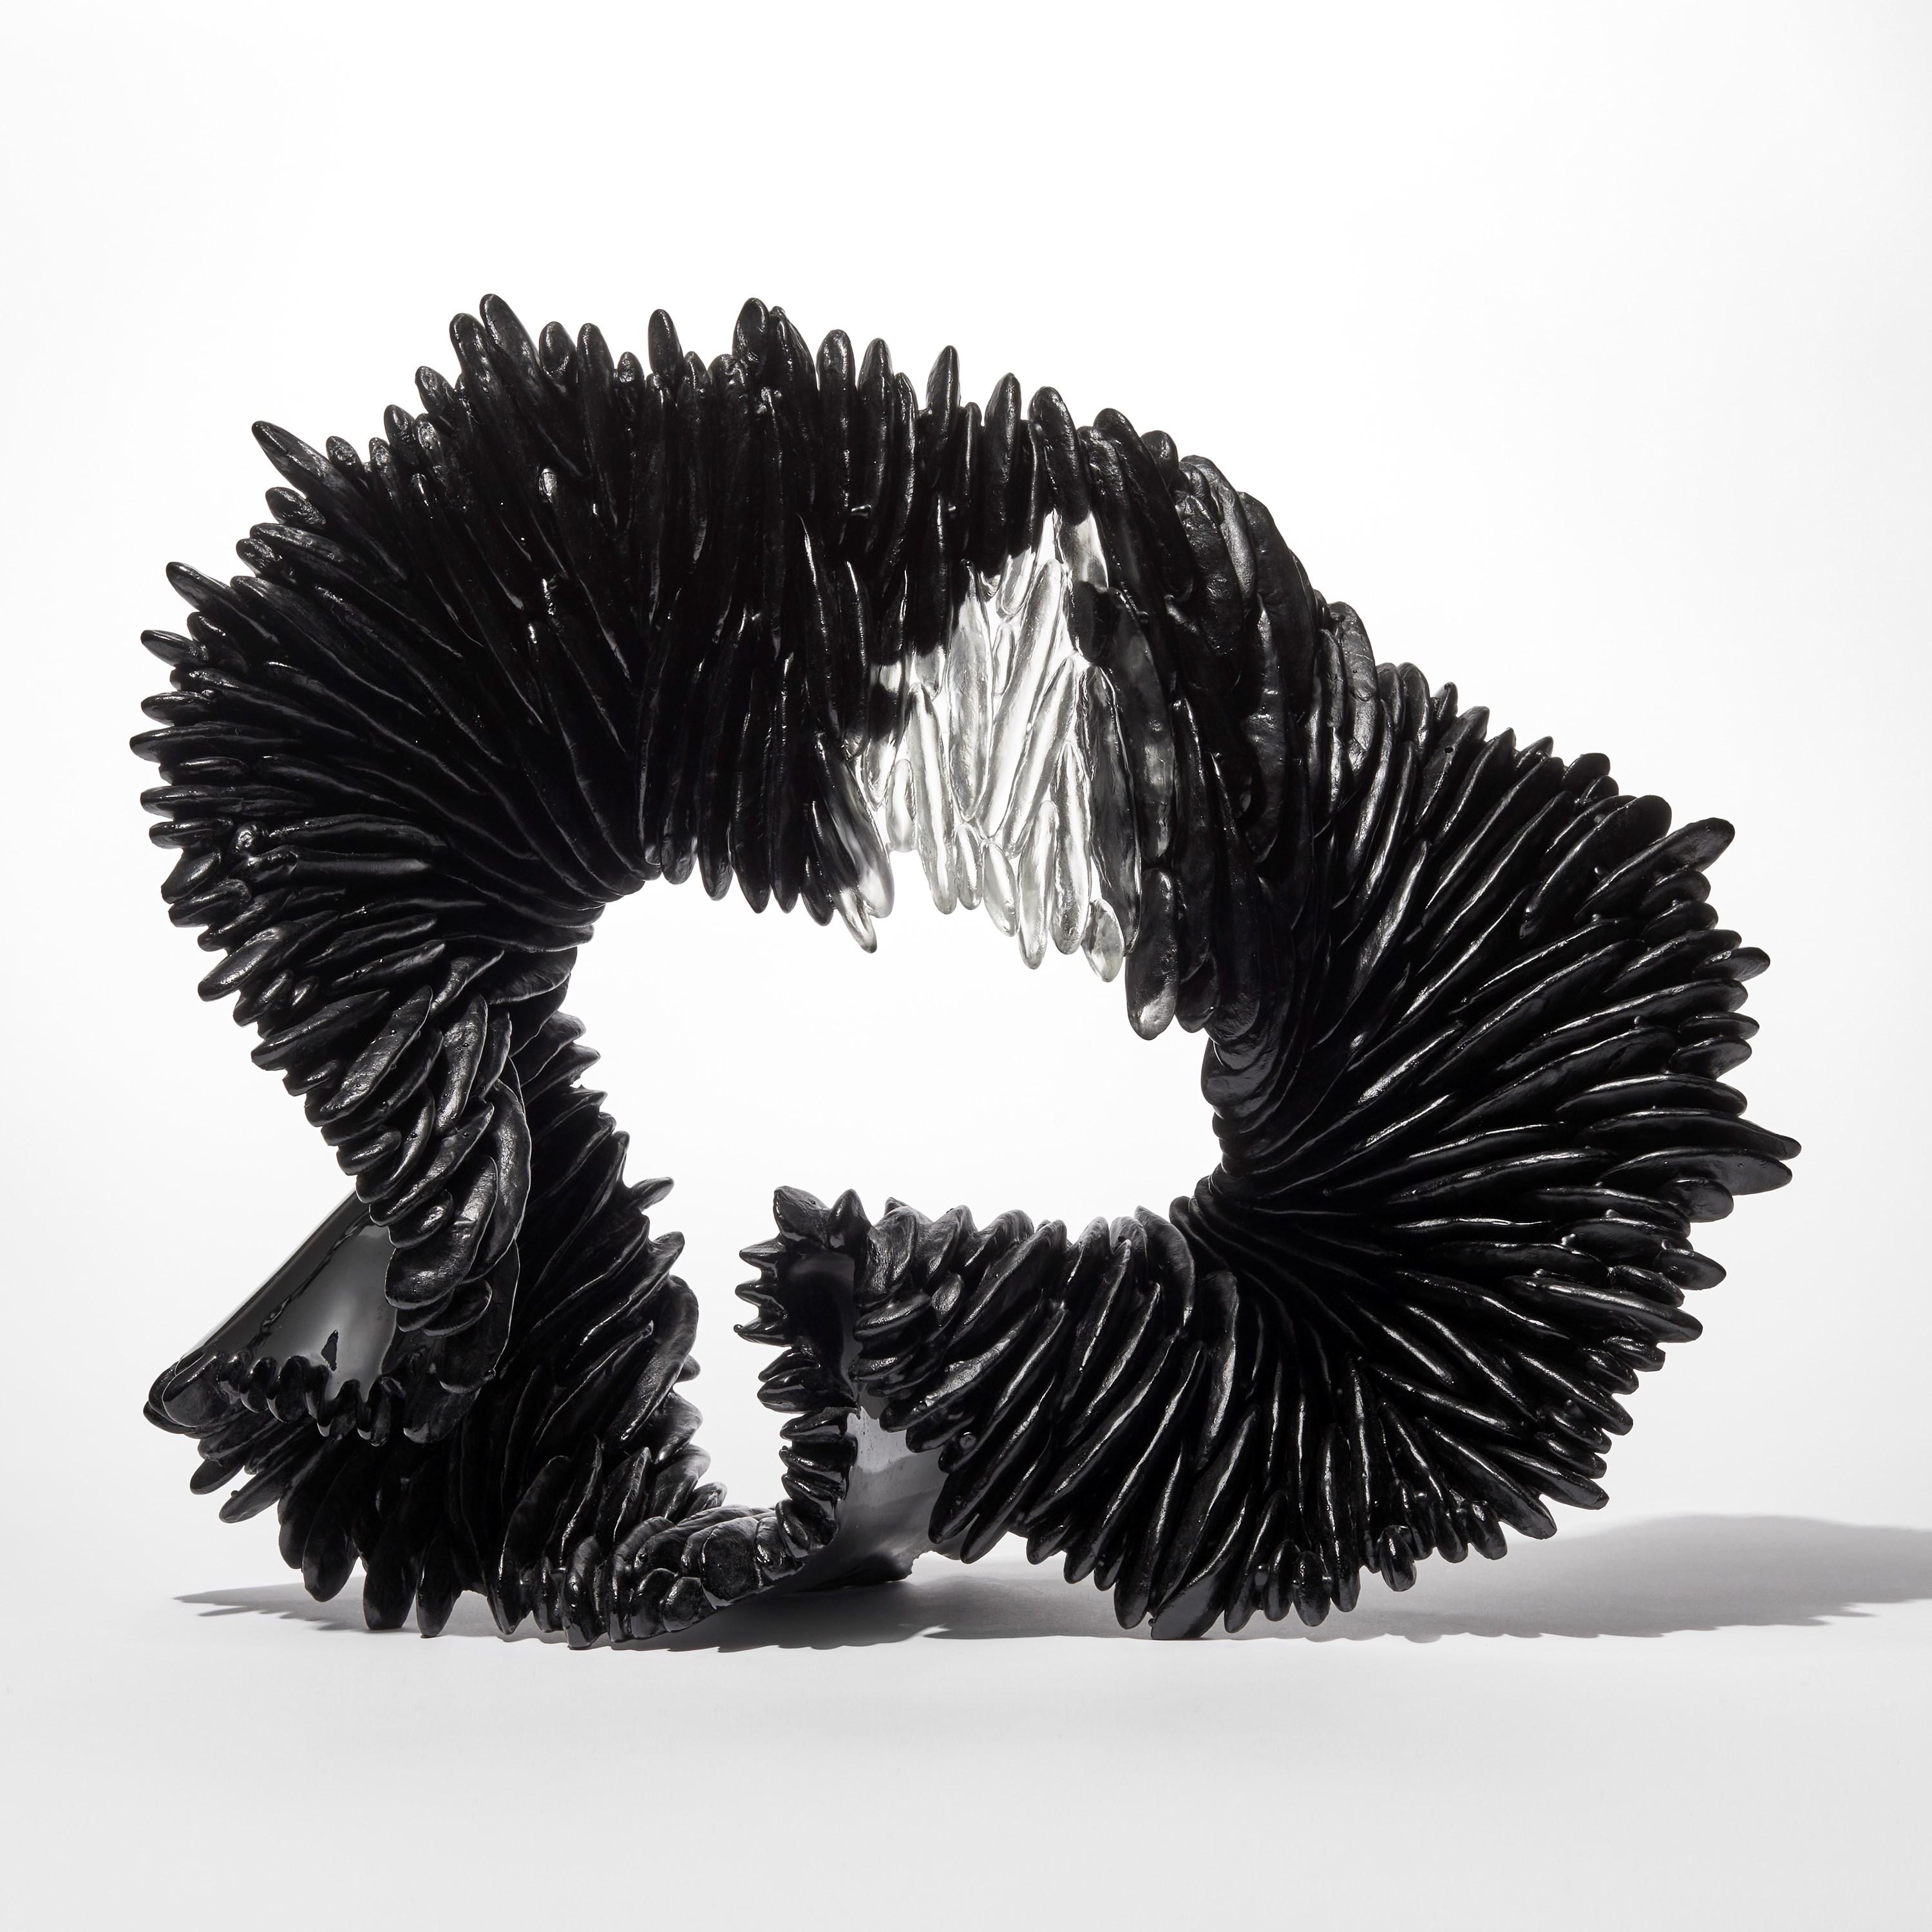 'Black Lamellae' is a unique glass sculpture by the British artist, Nina Casson McGarva.

Casson McGarva firstly casts her glass in a flat mould where she introduces all of the beautifully detailed, scaled surface texture, all unique and to her